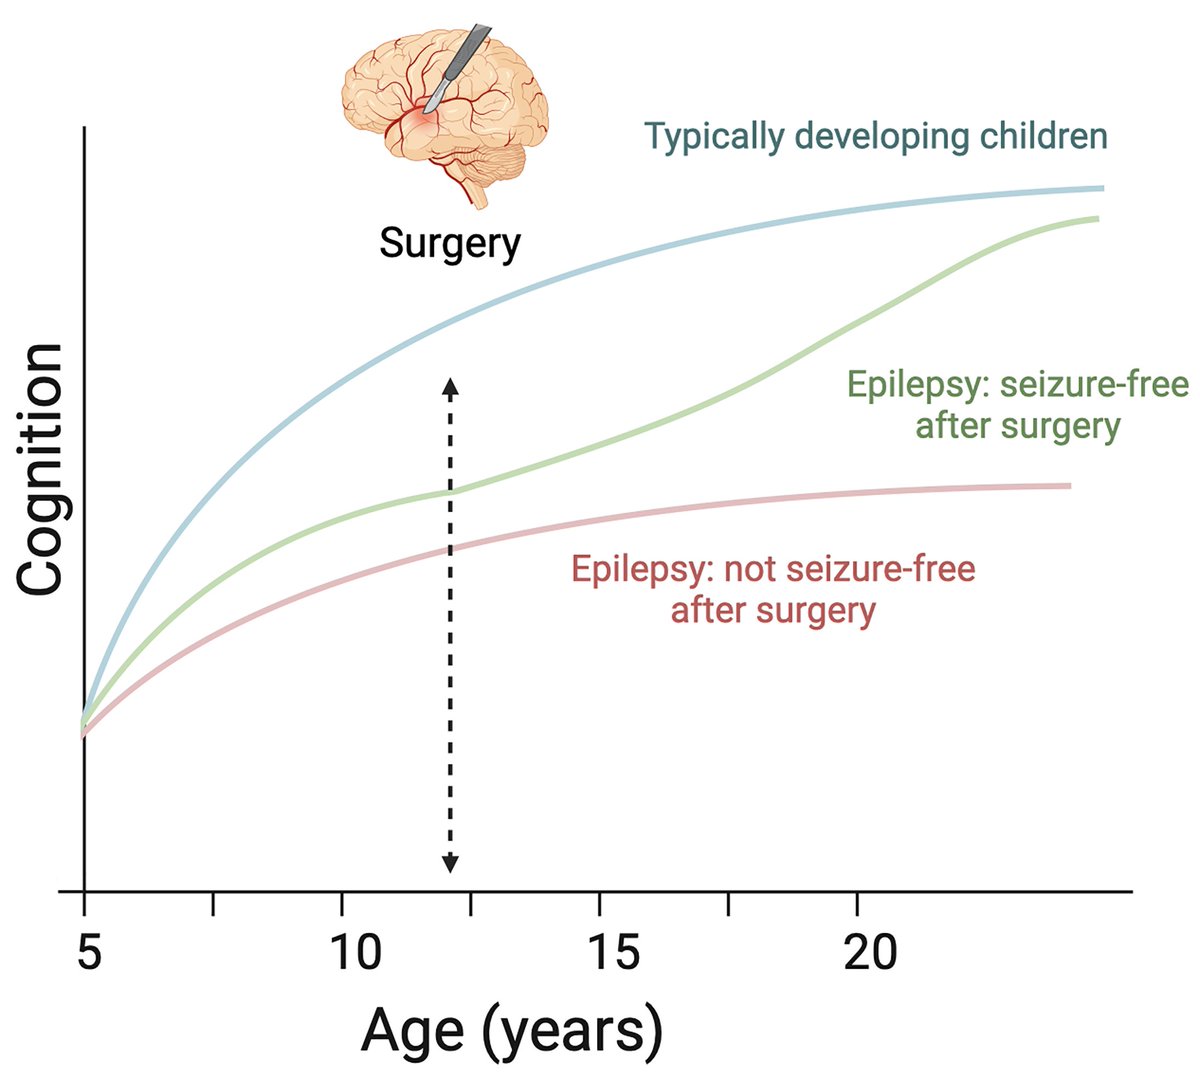 In a retrospective study, Eriksson et al. show that epilepsy surgery was able to halt and even reverse a decline in neuropsychological functioning in certain children by providing seizure freedom and the opportunity to discontinue antiseizure medication. tinyurl.com/2s3wu9u6